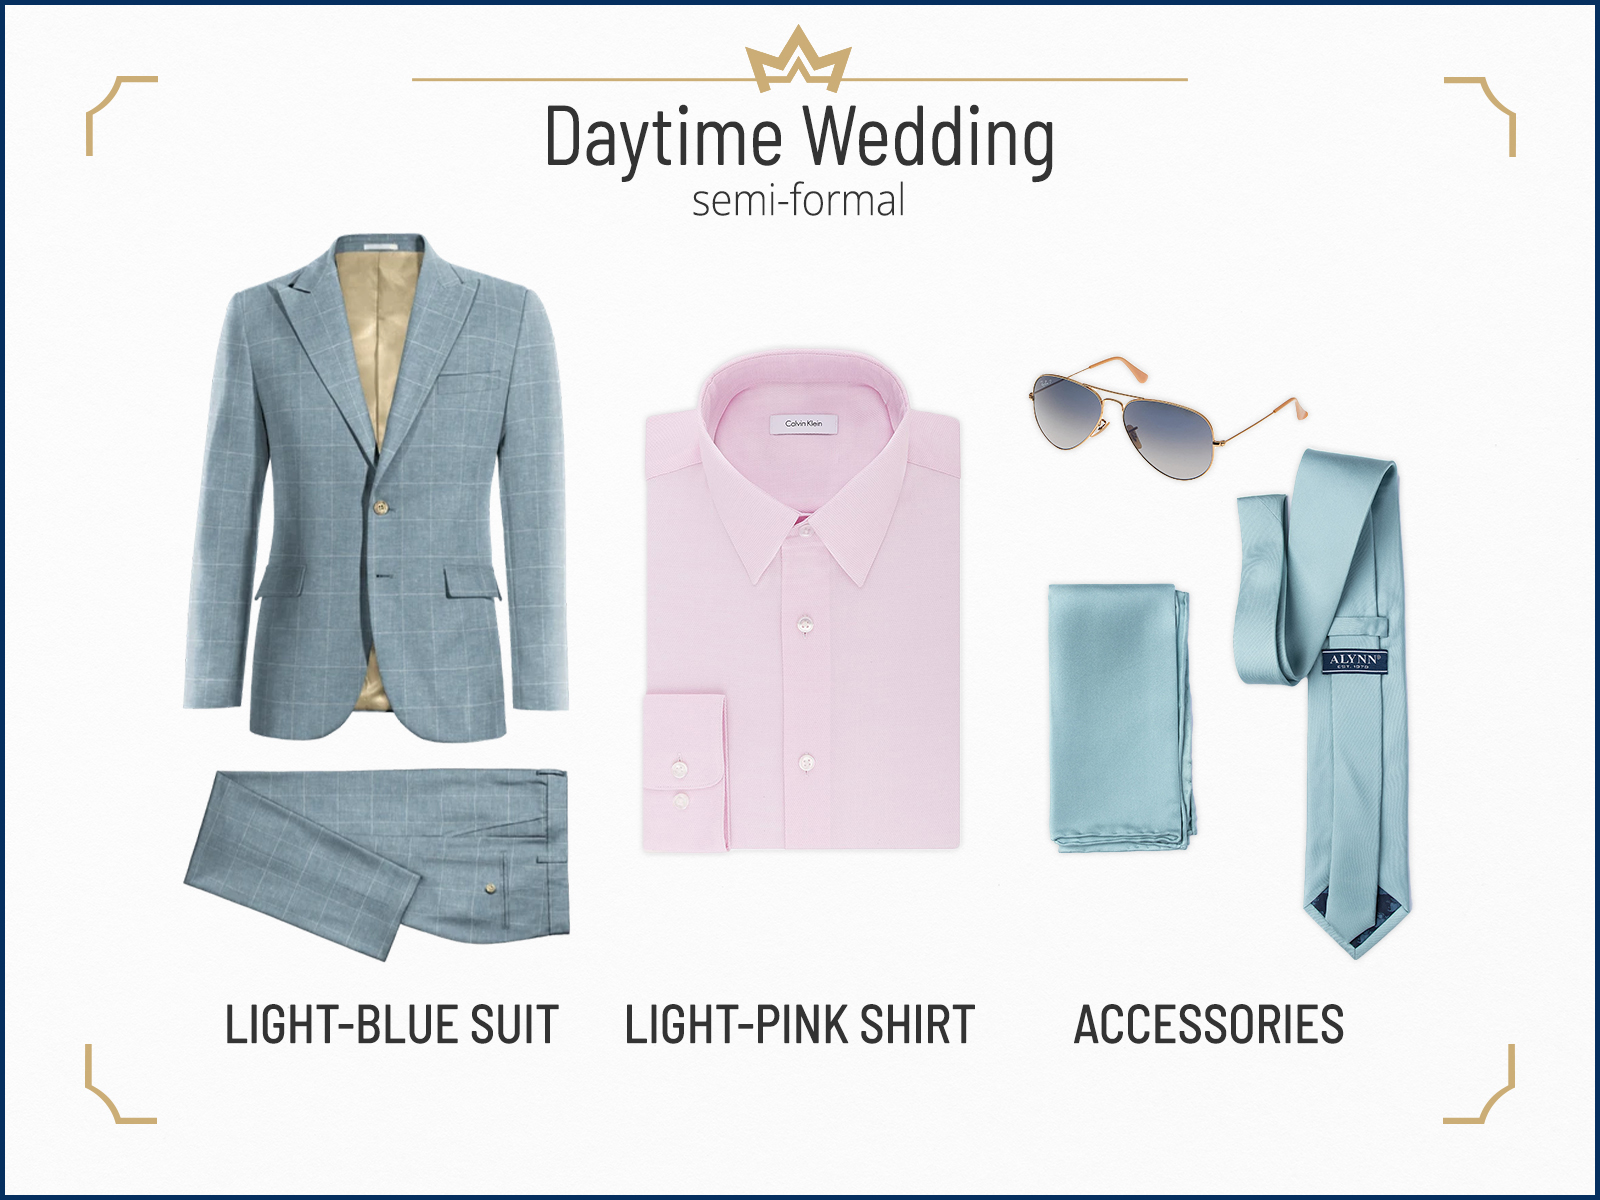 Semi-formal daytime wedding outfit